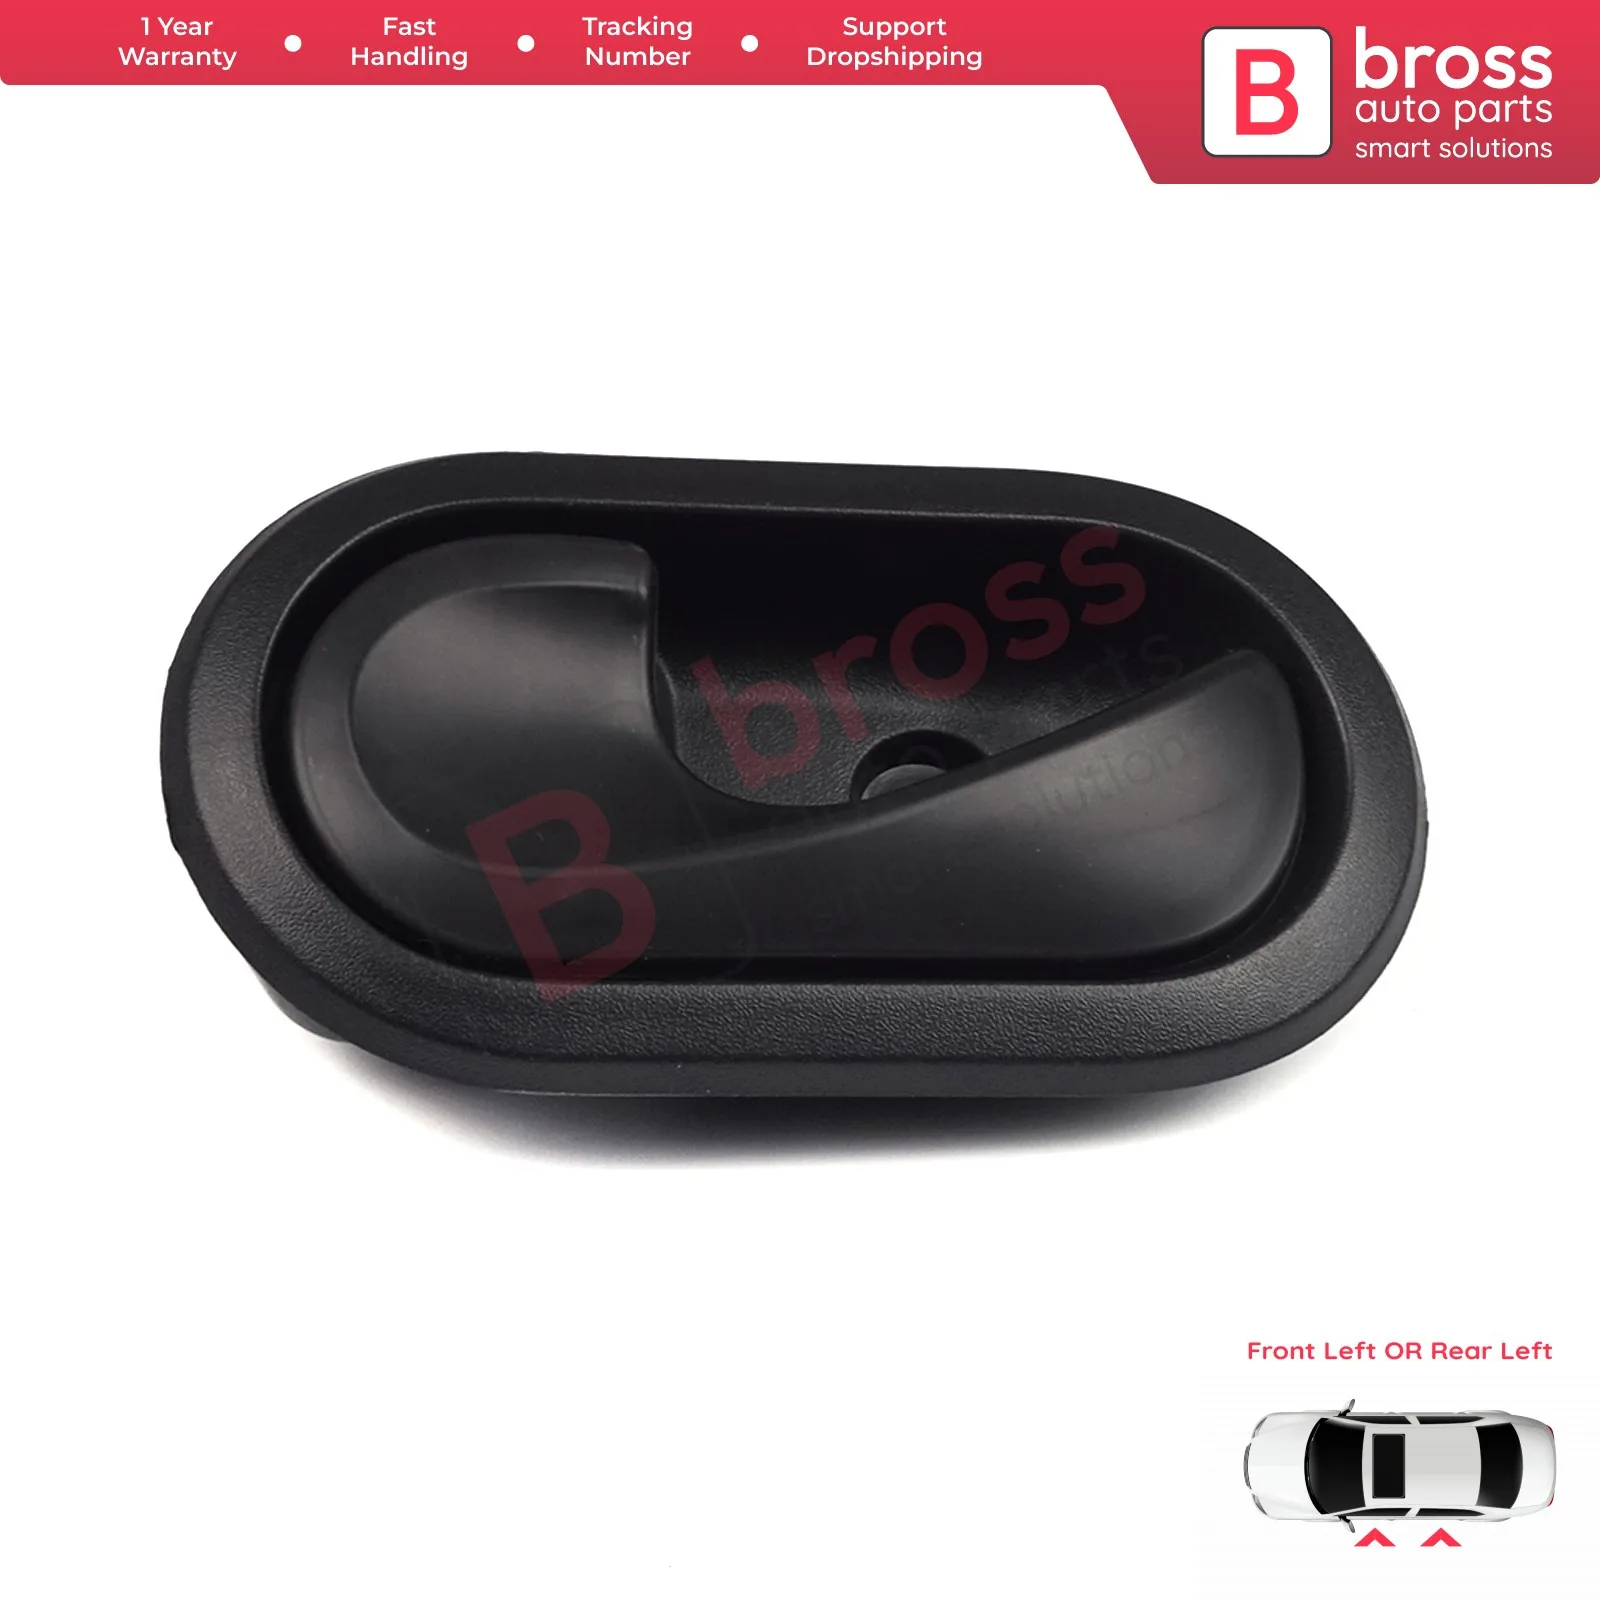 

BDP601 Interior Door Handle Black For Dokker 12-On,Lodgy 12-On, duster 09-On,Sandero 12-On,Logan 12-On Front OR Rear Left Doors